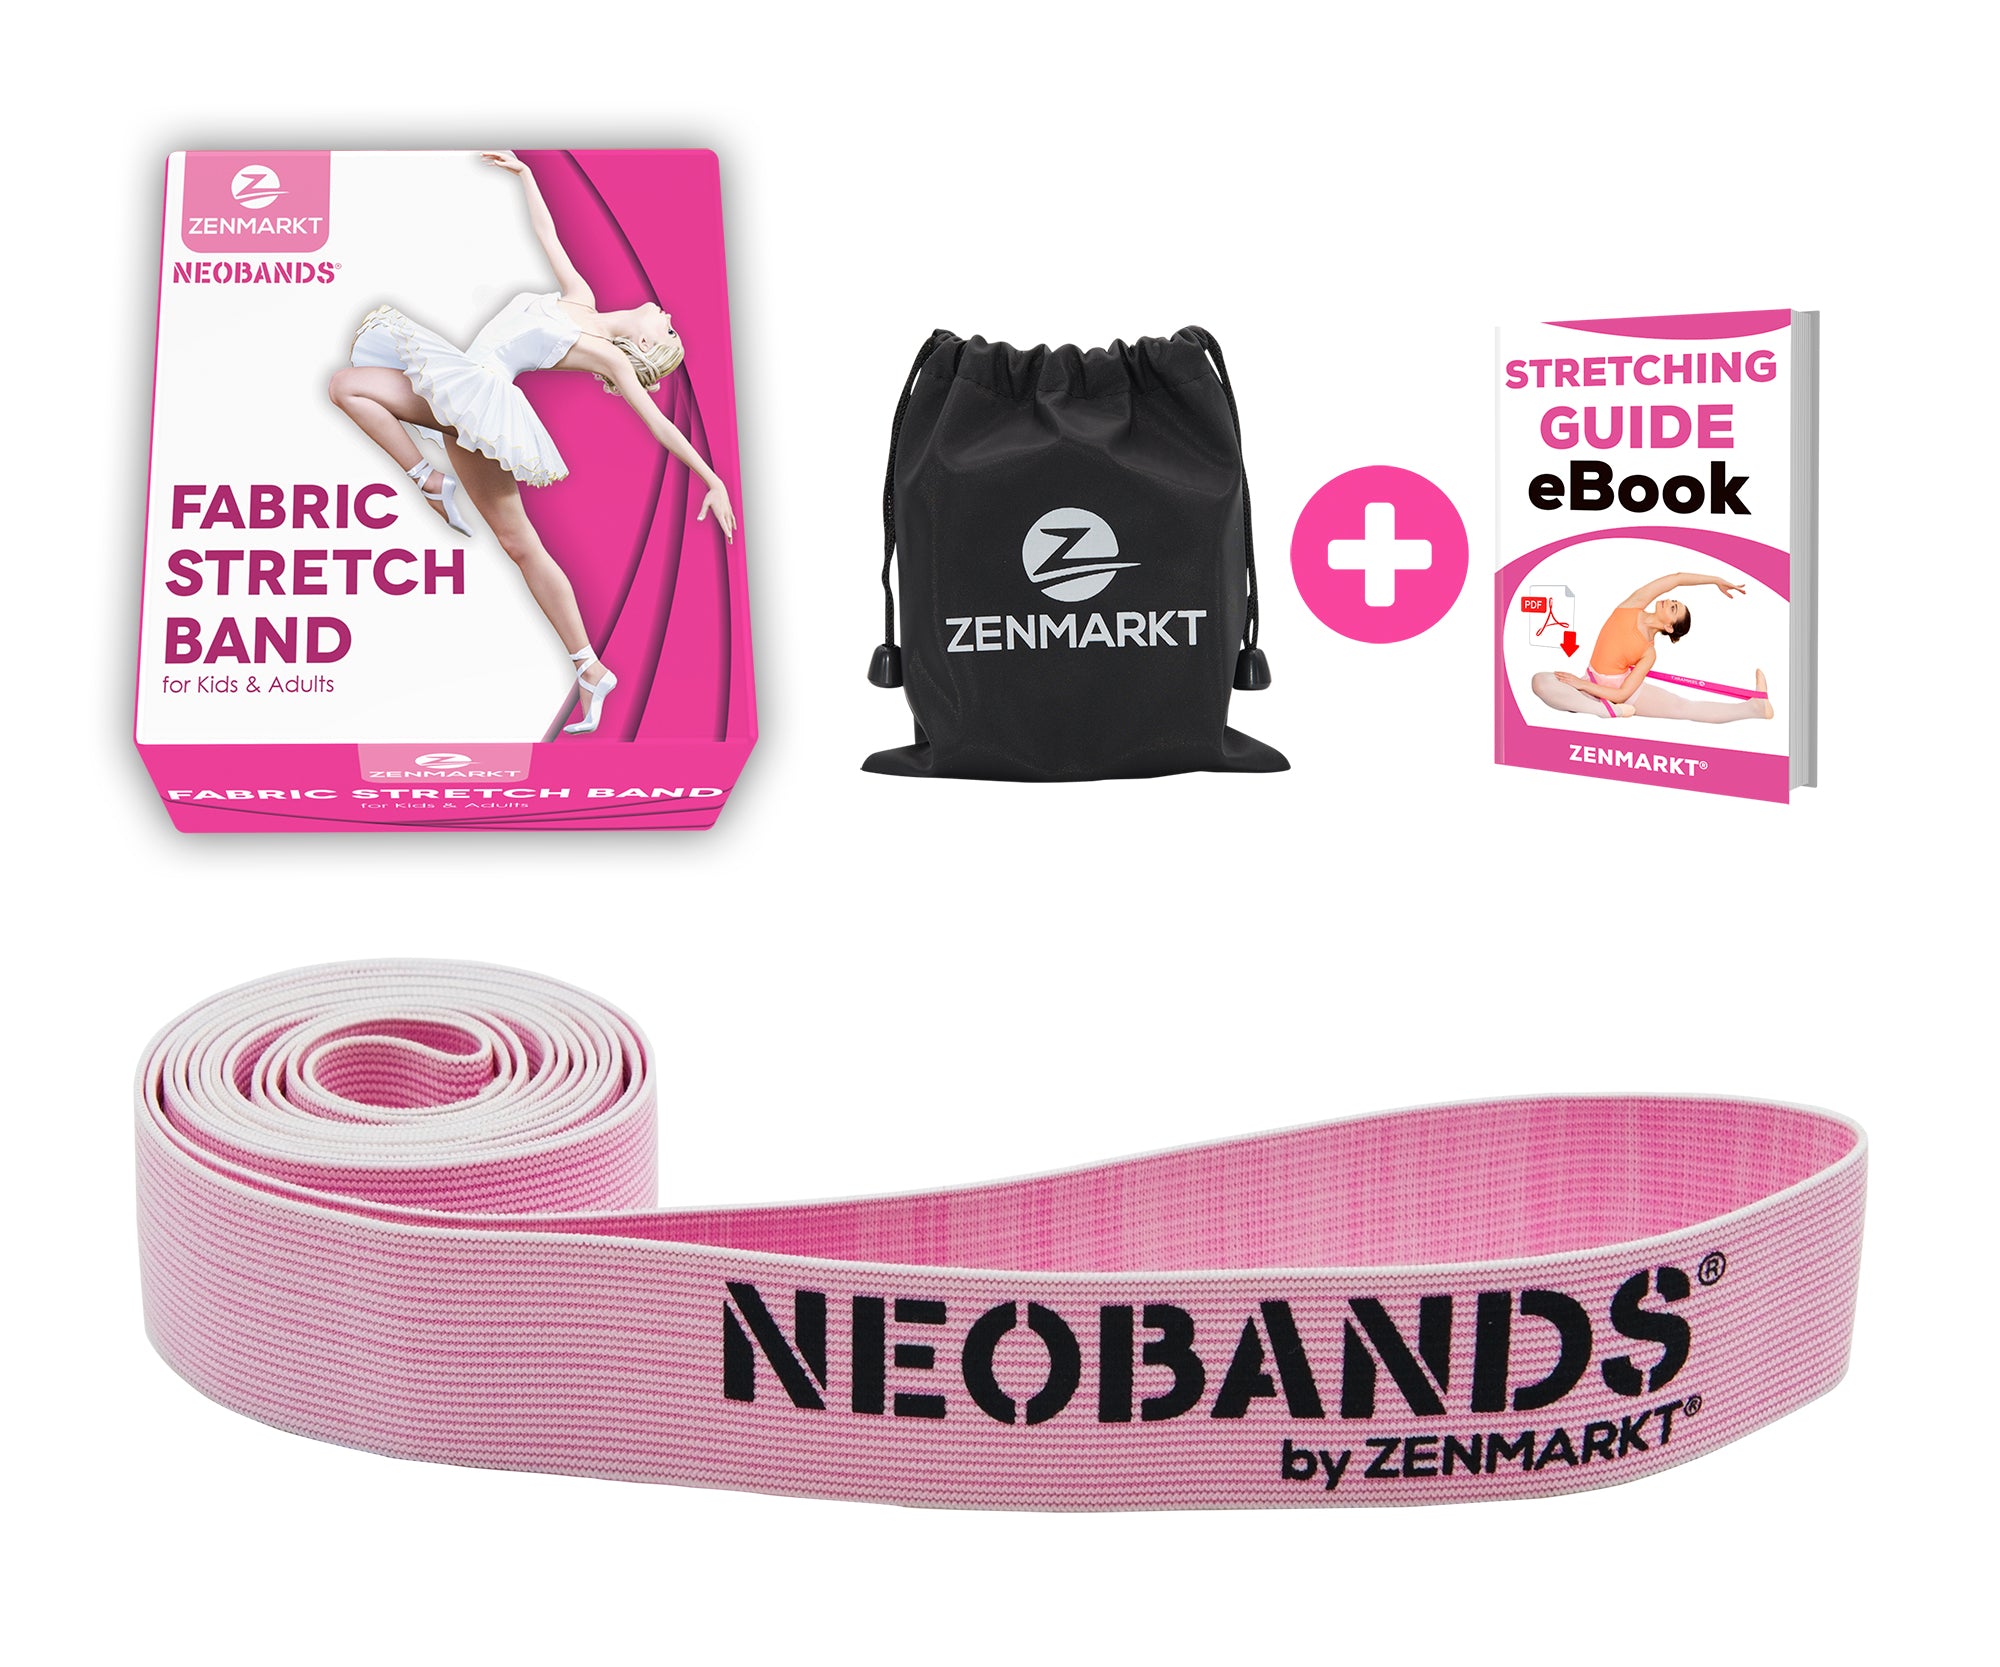 BuyWeek Stretch Strap,Stretch Band Strap With Number Elastic